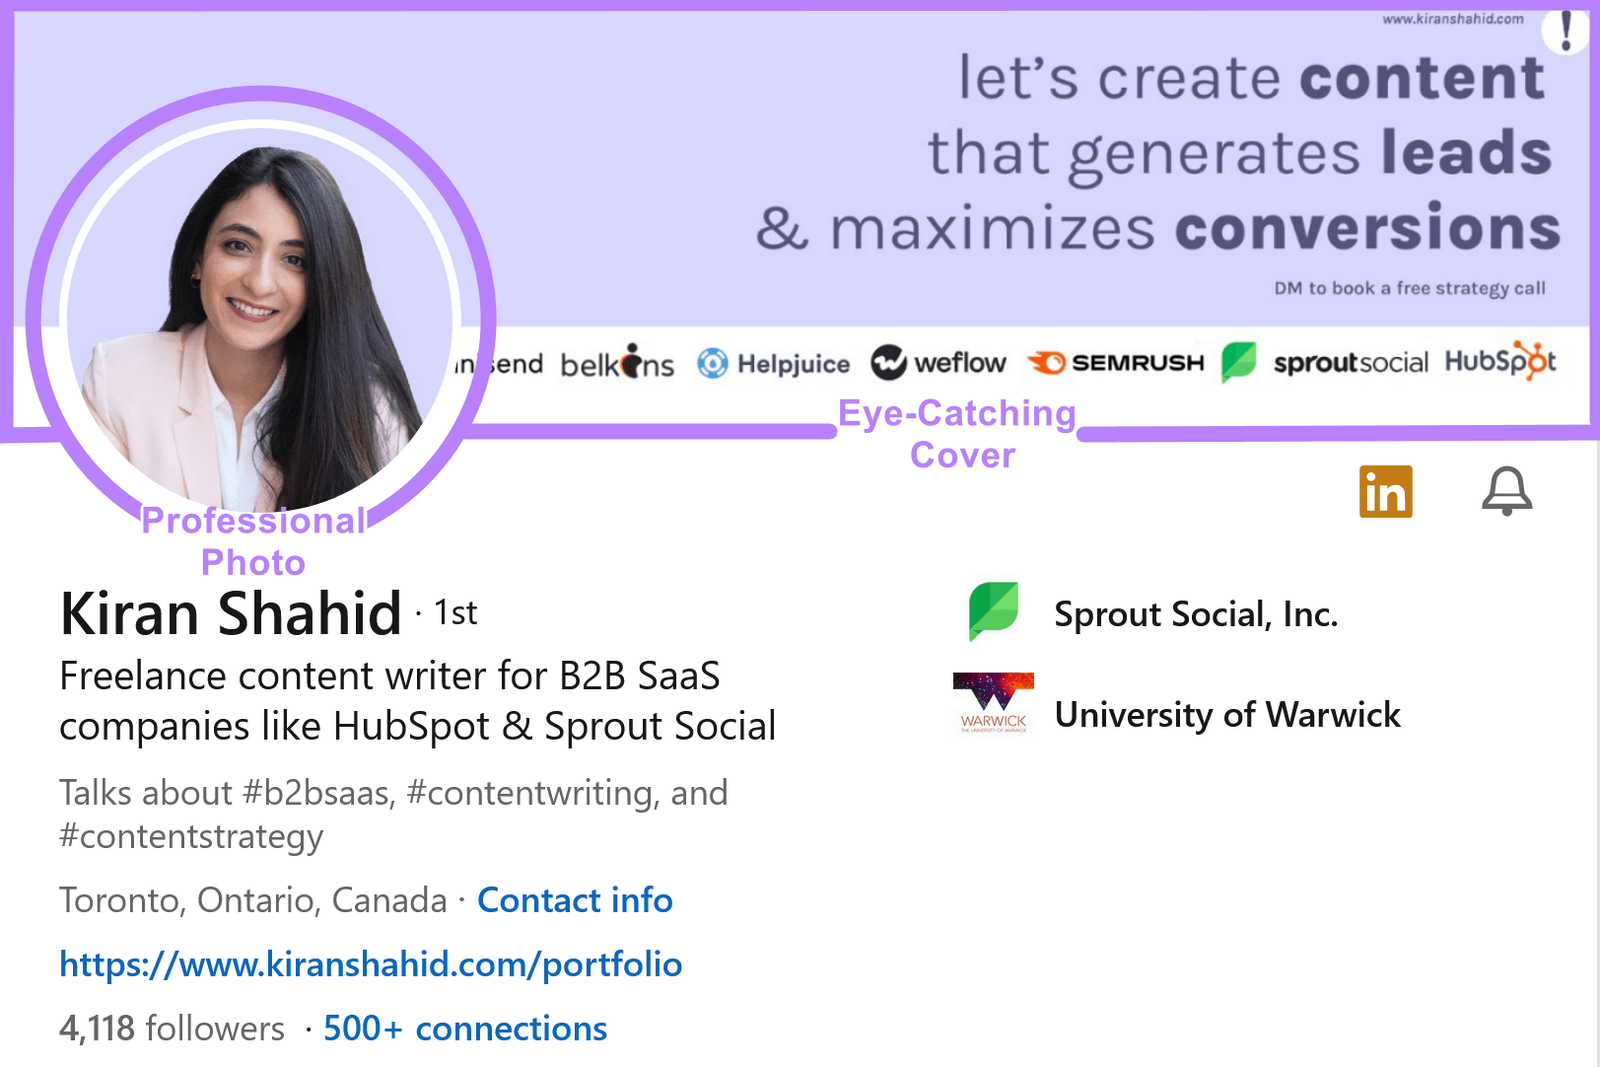 example of LinkedIn profile of "Kiran Shahid" showing example of high-quality profile and cover images